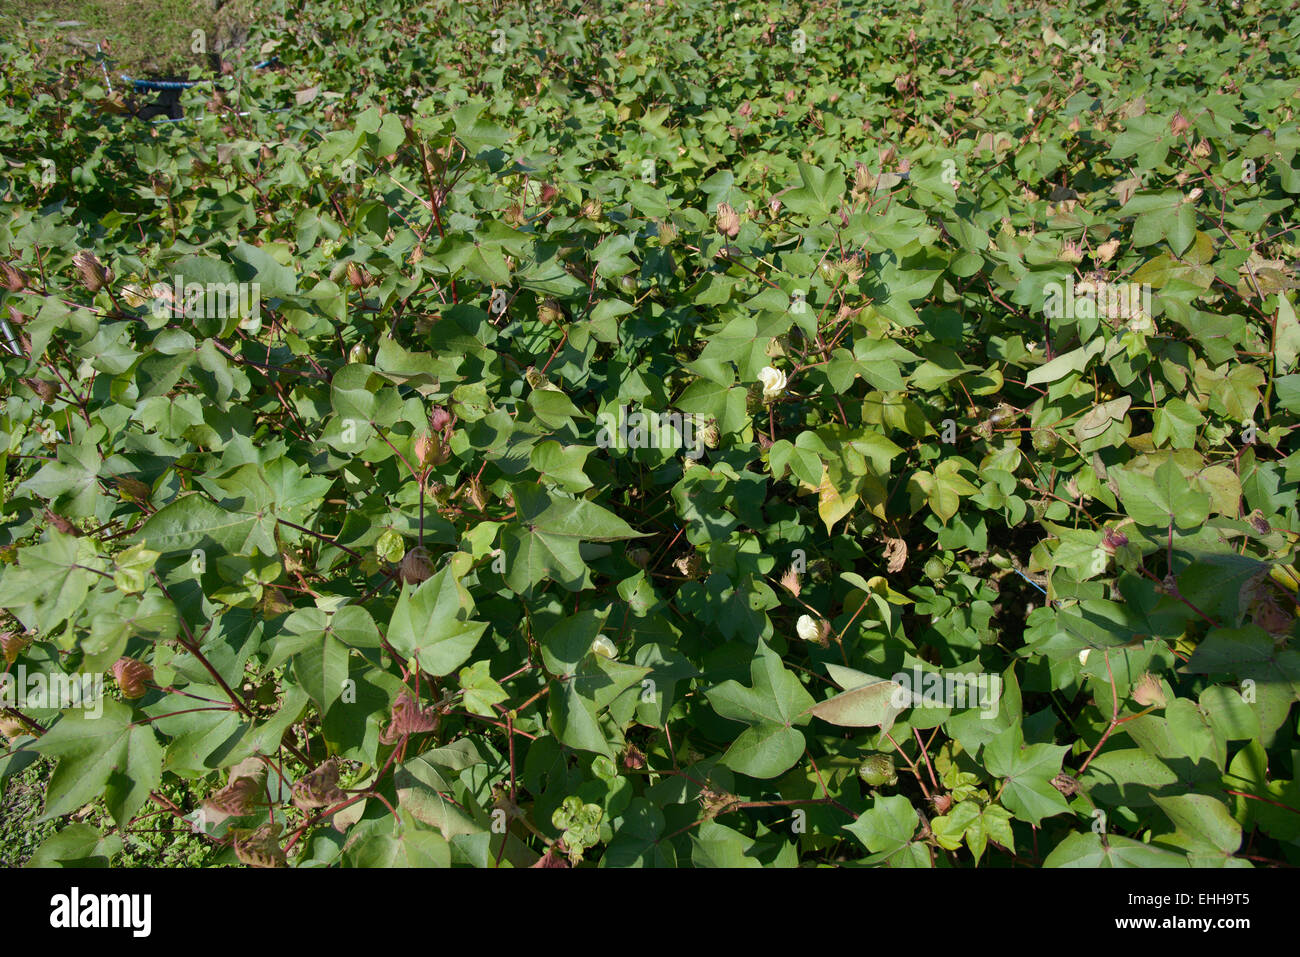 Cotton Field In Full Bloom Stock Photo, Picture and Royalty Free Image.  Image 67648810.